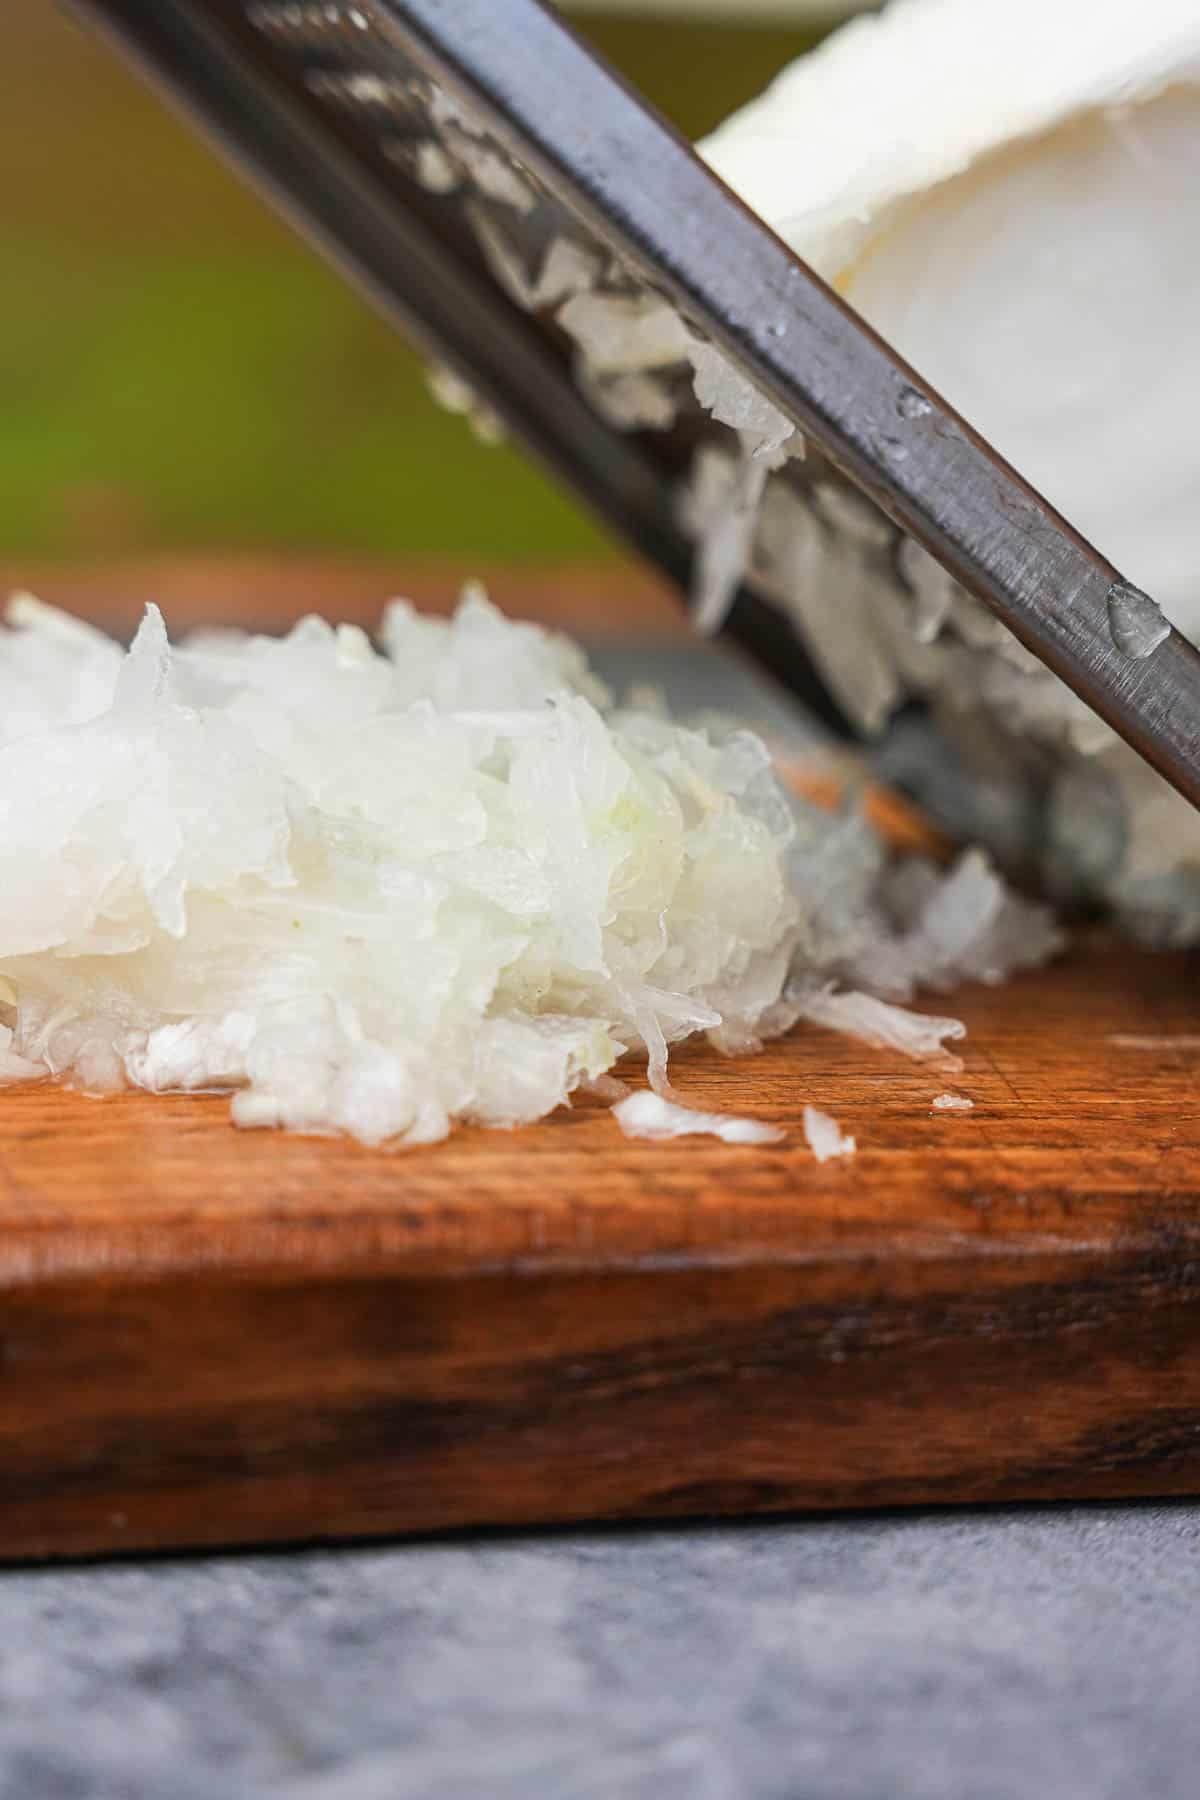 Onions being shredded by hand onto a wooden board.